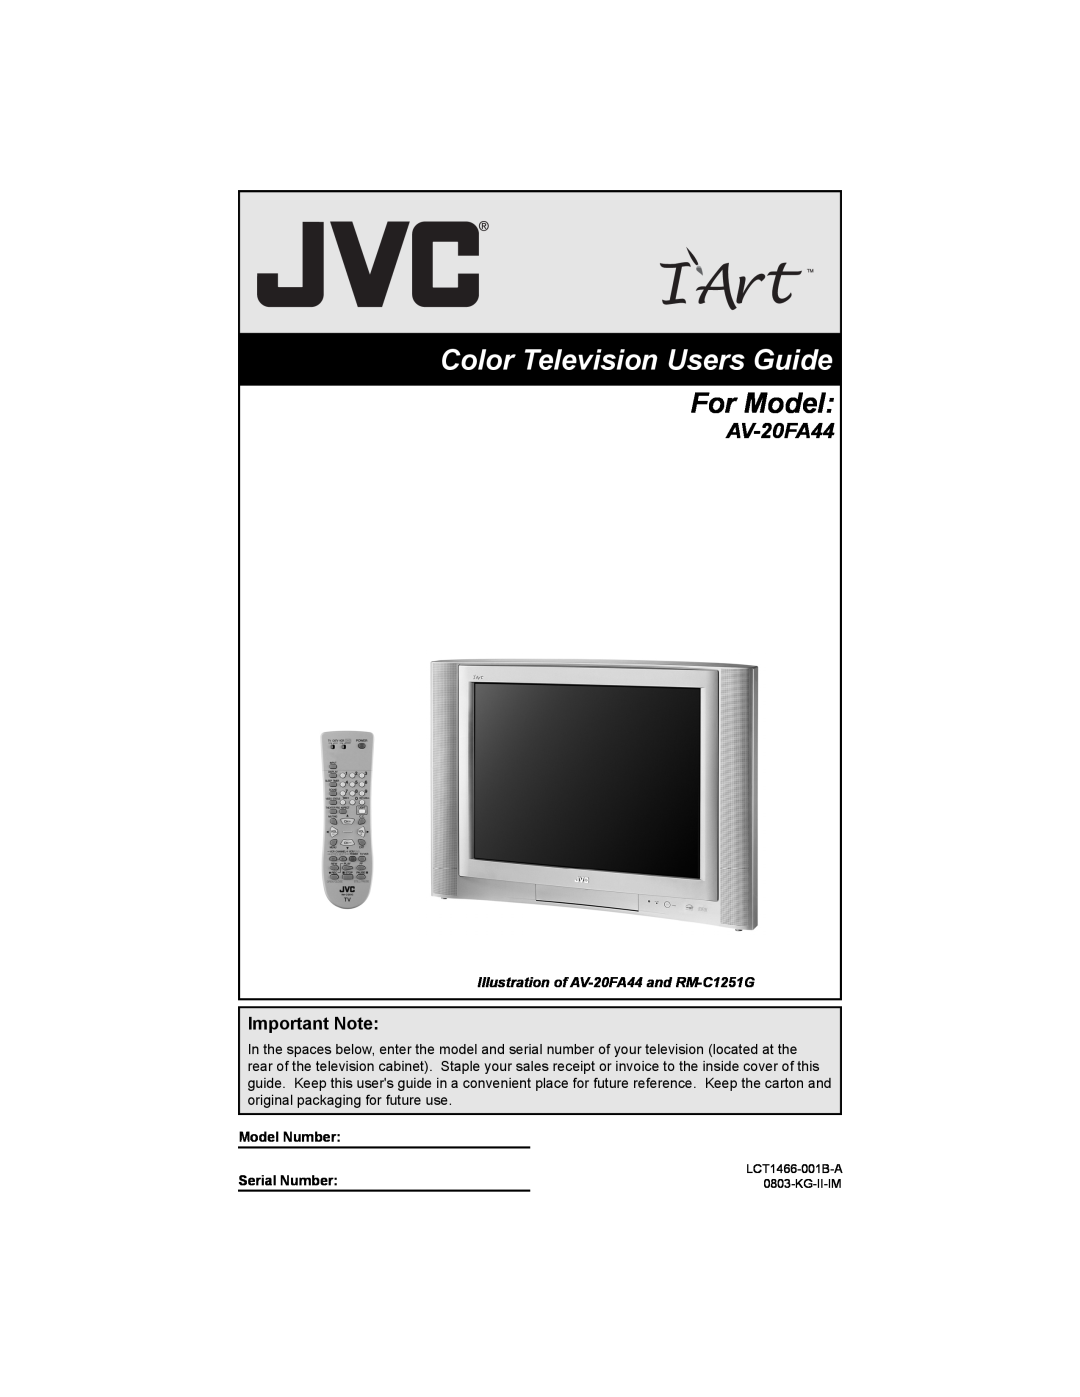 JVC AV 20FA44 manual Important Note, Illustration of AV-20FA44 and RM-C1251G, Color Television Users Guide, For Model 